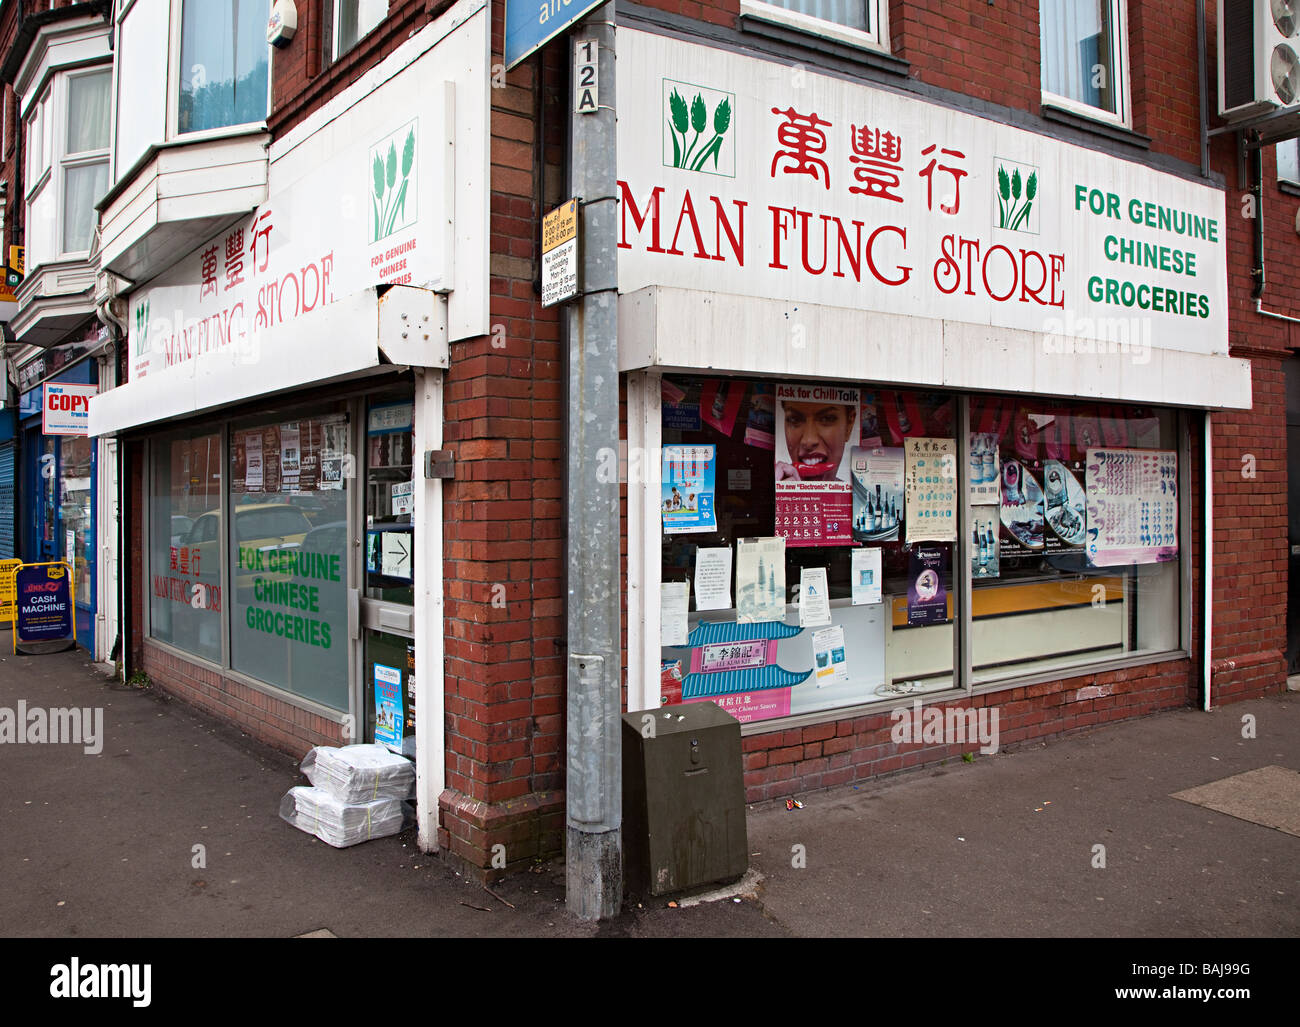 Chinese grocery store shop Cardiff Wales UK Stock Photo